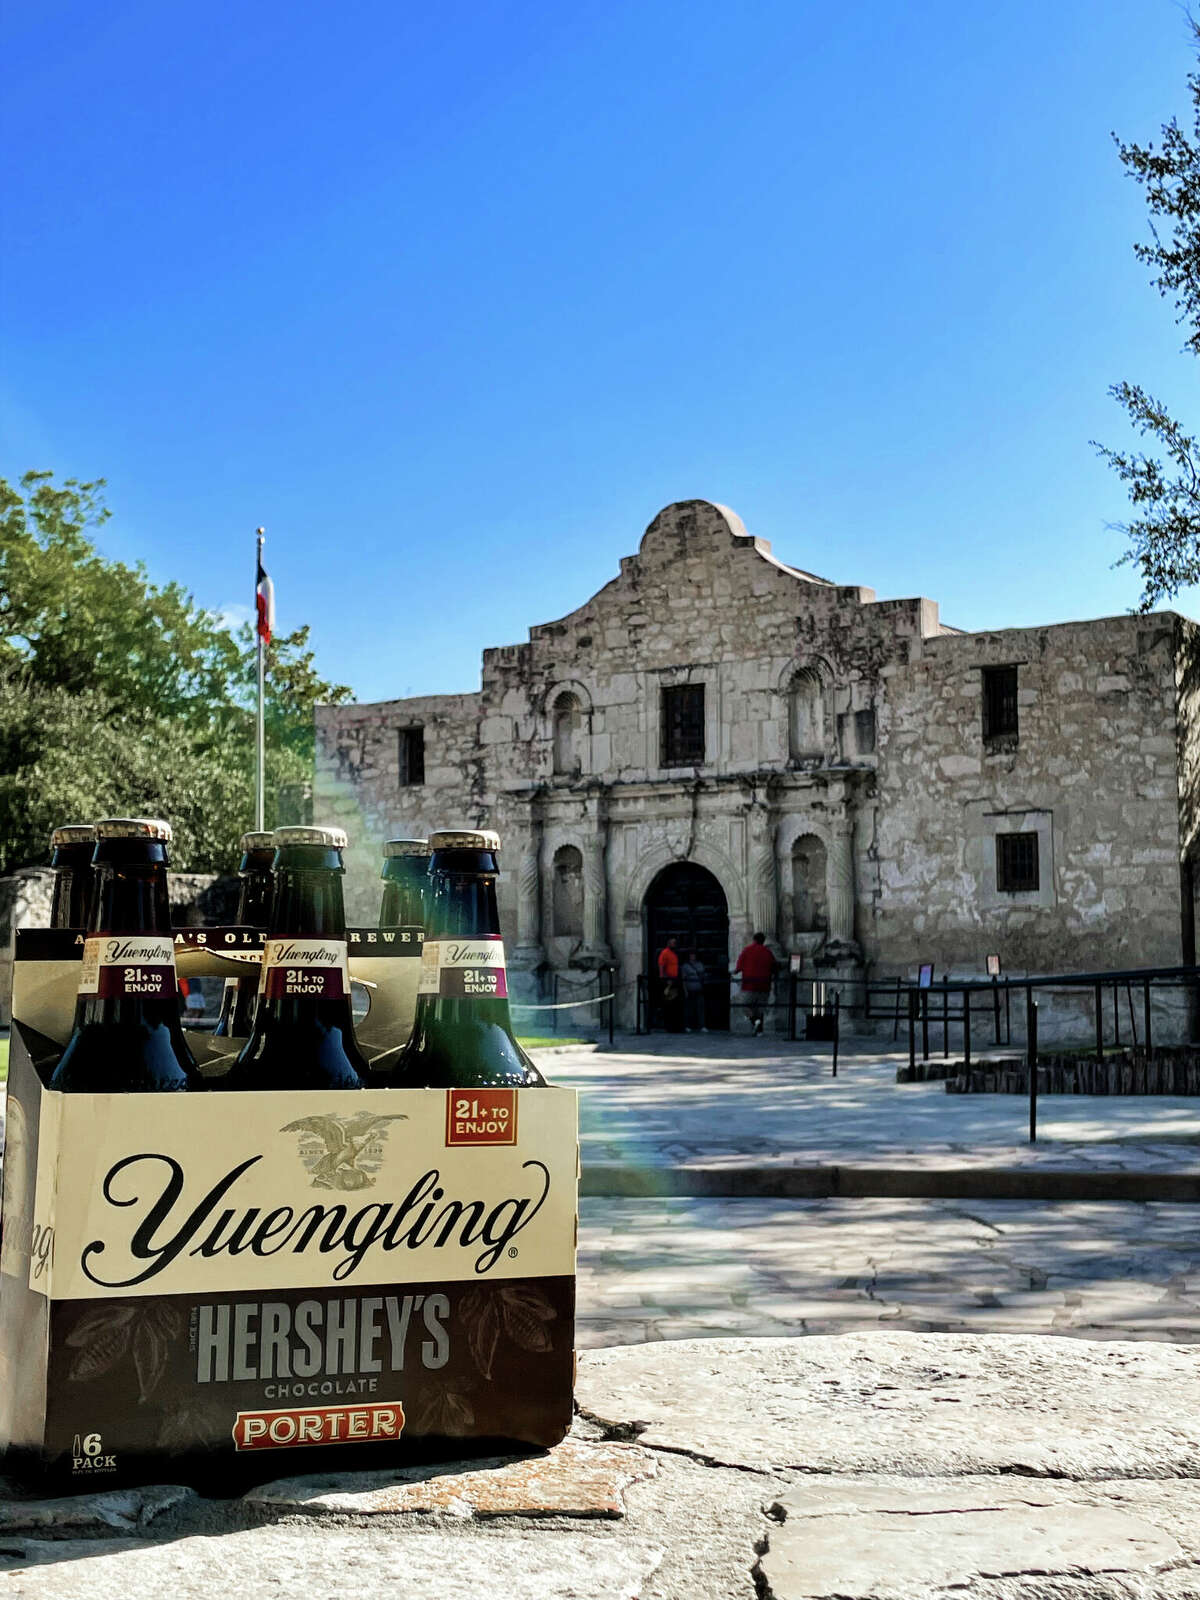 Yuengling Hershey's Chocolate Porter is available for the first time in Texas starting Oct. 17.